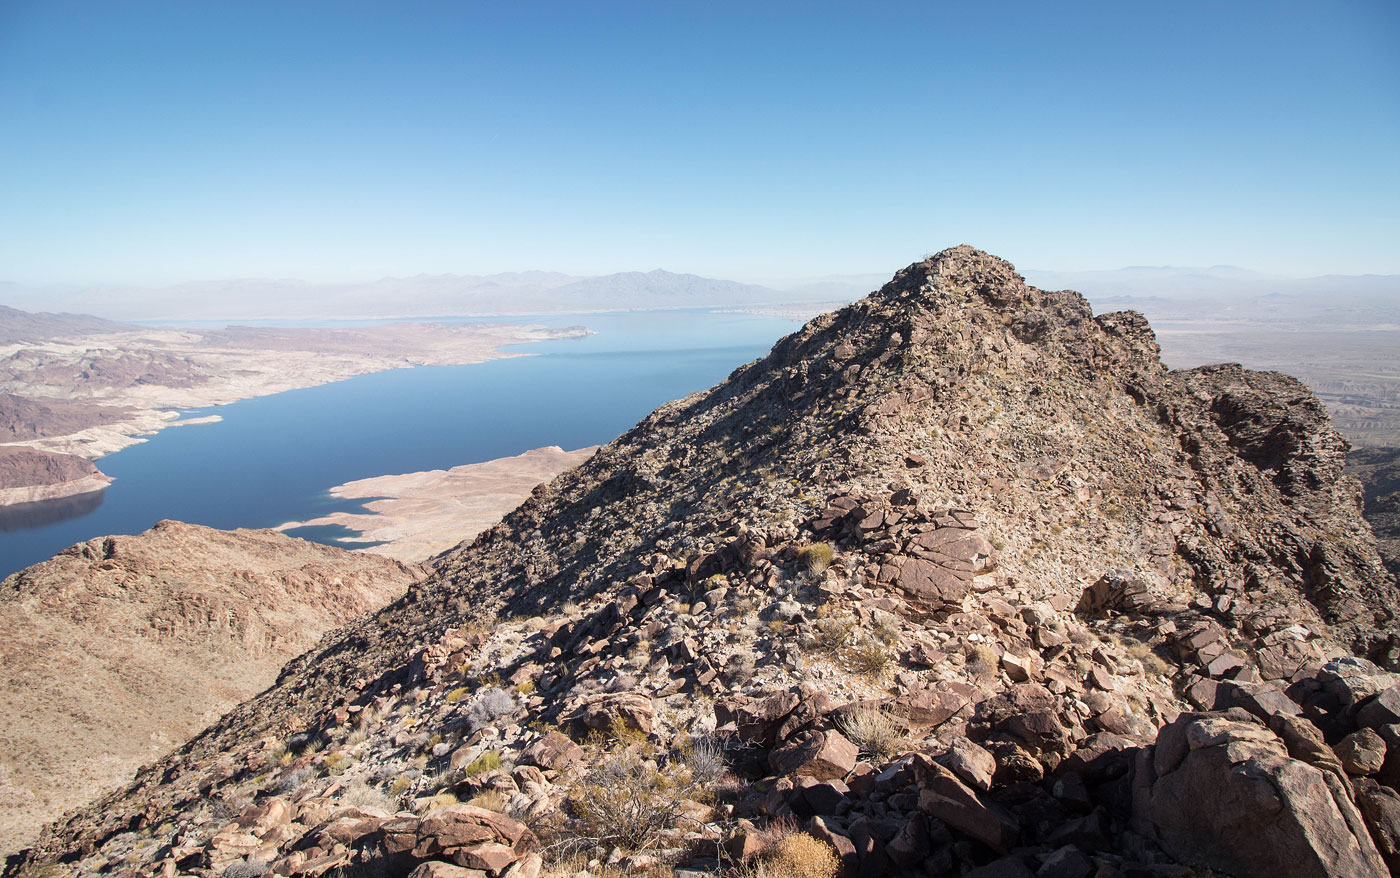 Hike Arch Mountain in Lake Mead National Recreation Area, Arizona - Stav is Lost